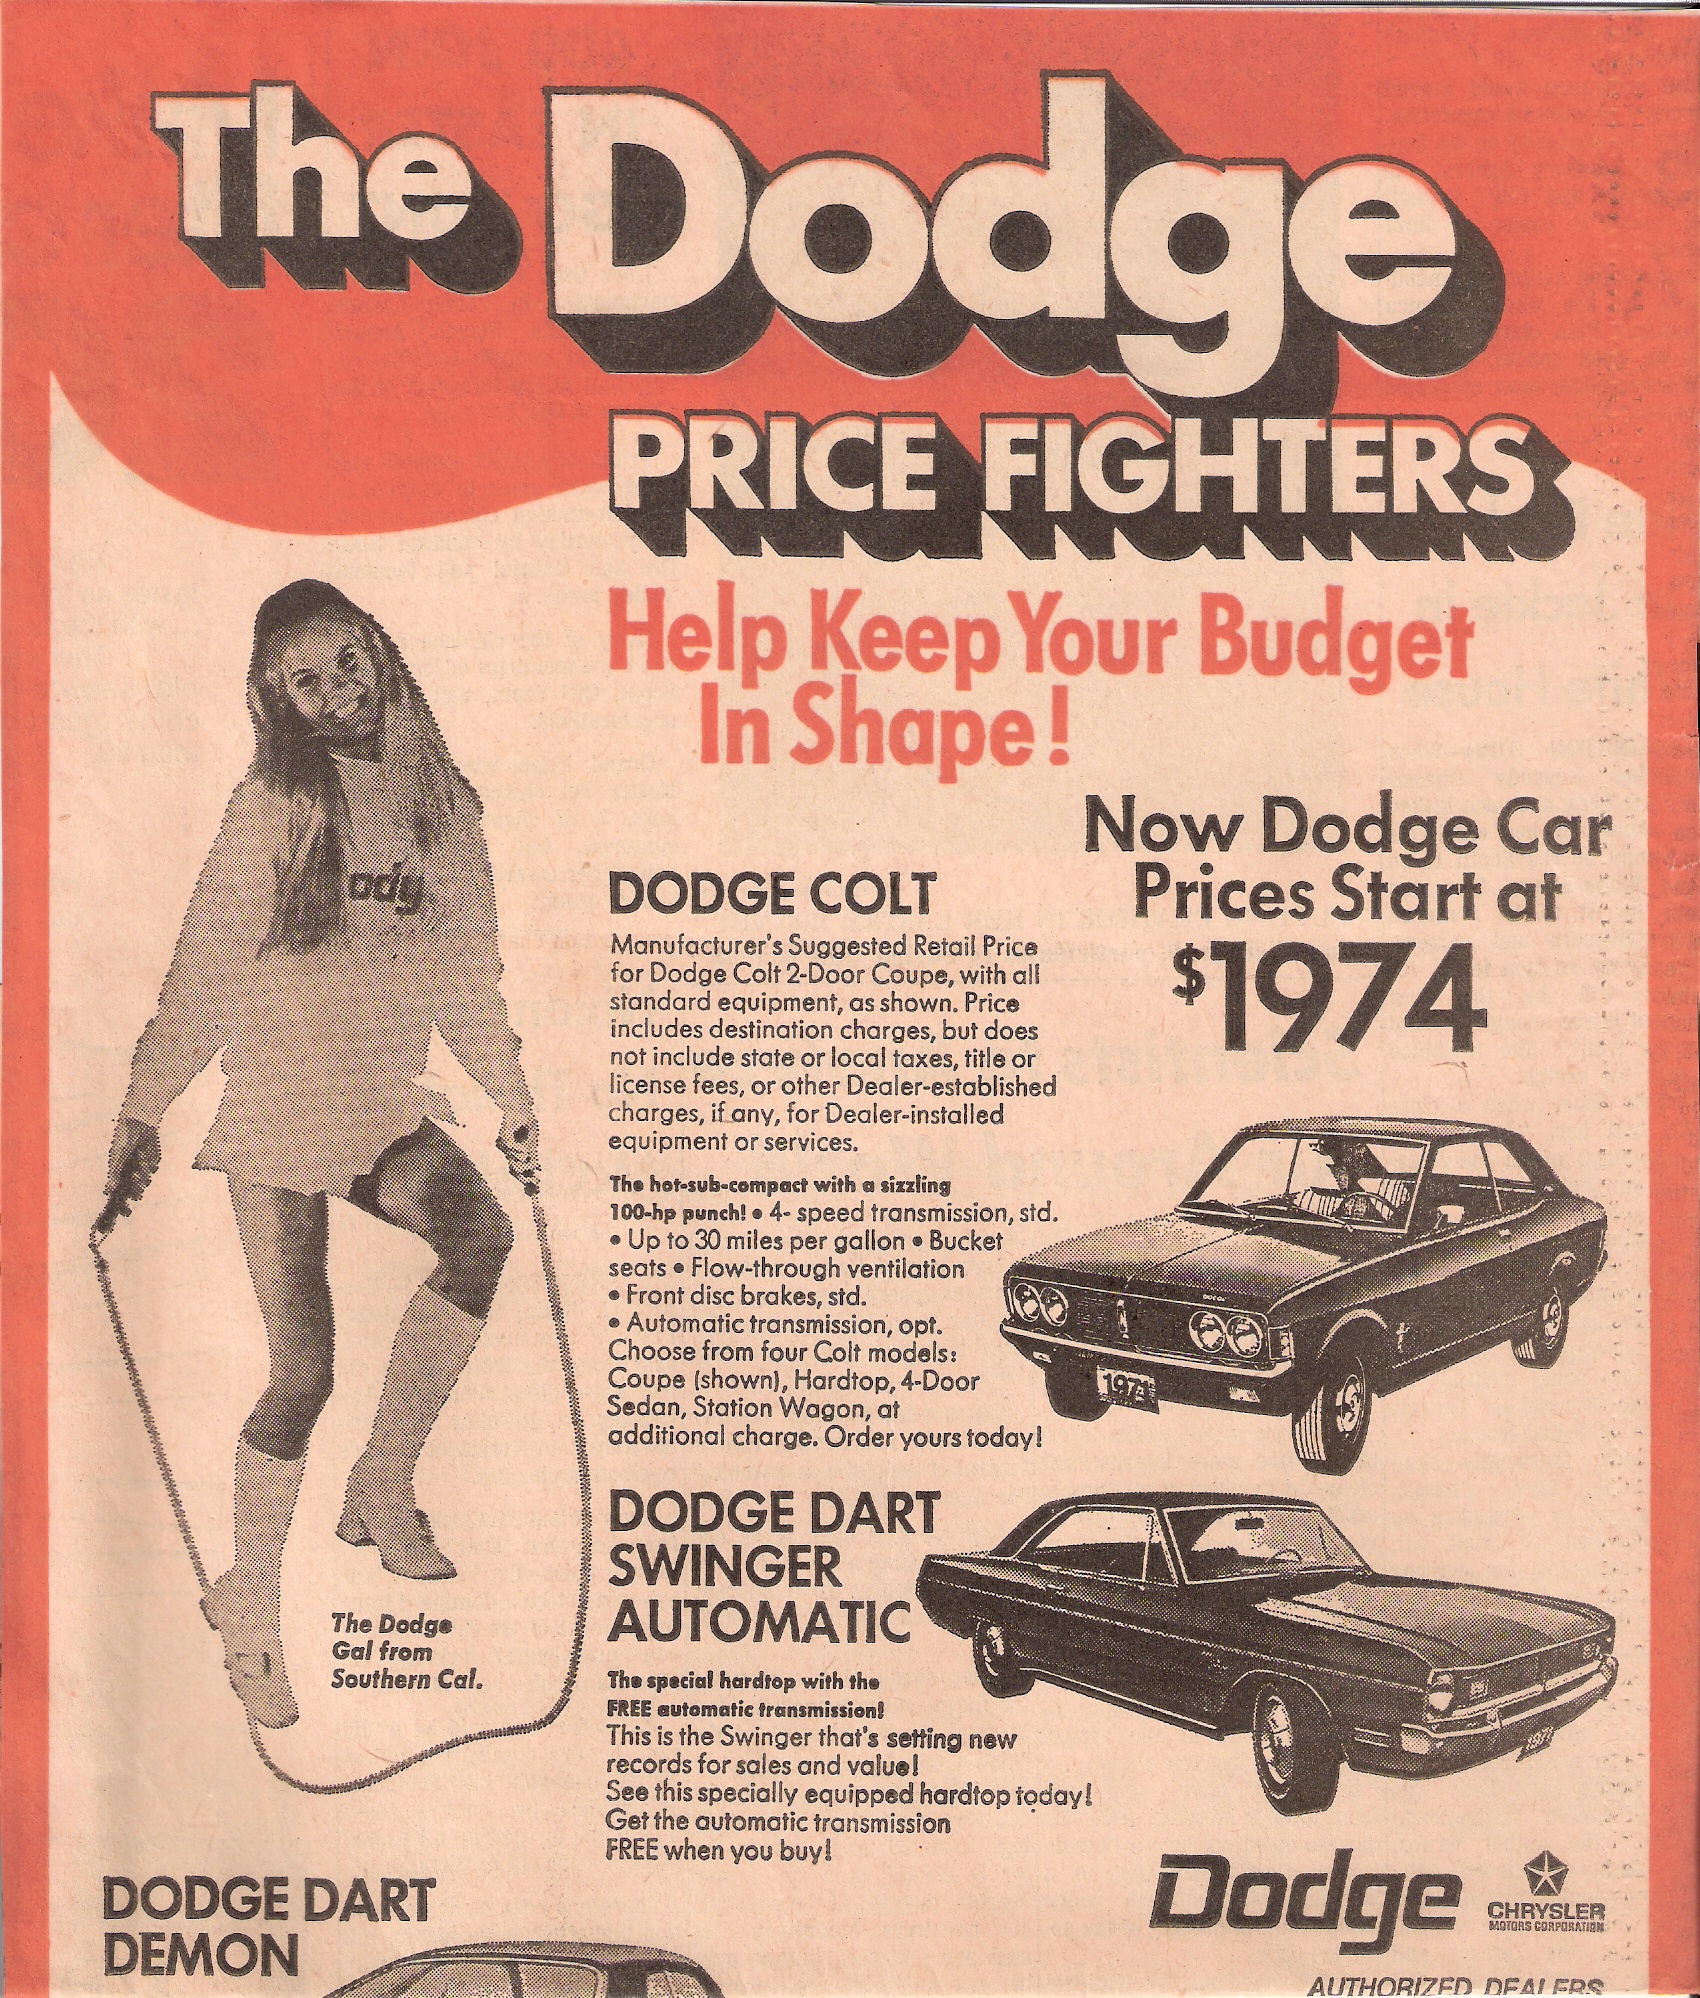 I was The Dodge Price Fighter and fought Mike Quarry and Sugar Ray Robinson and WON!